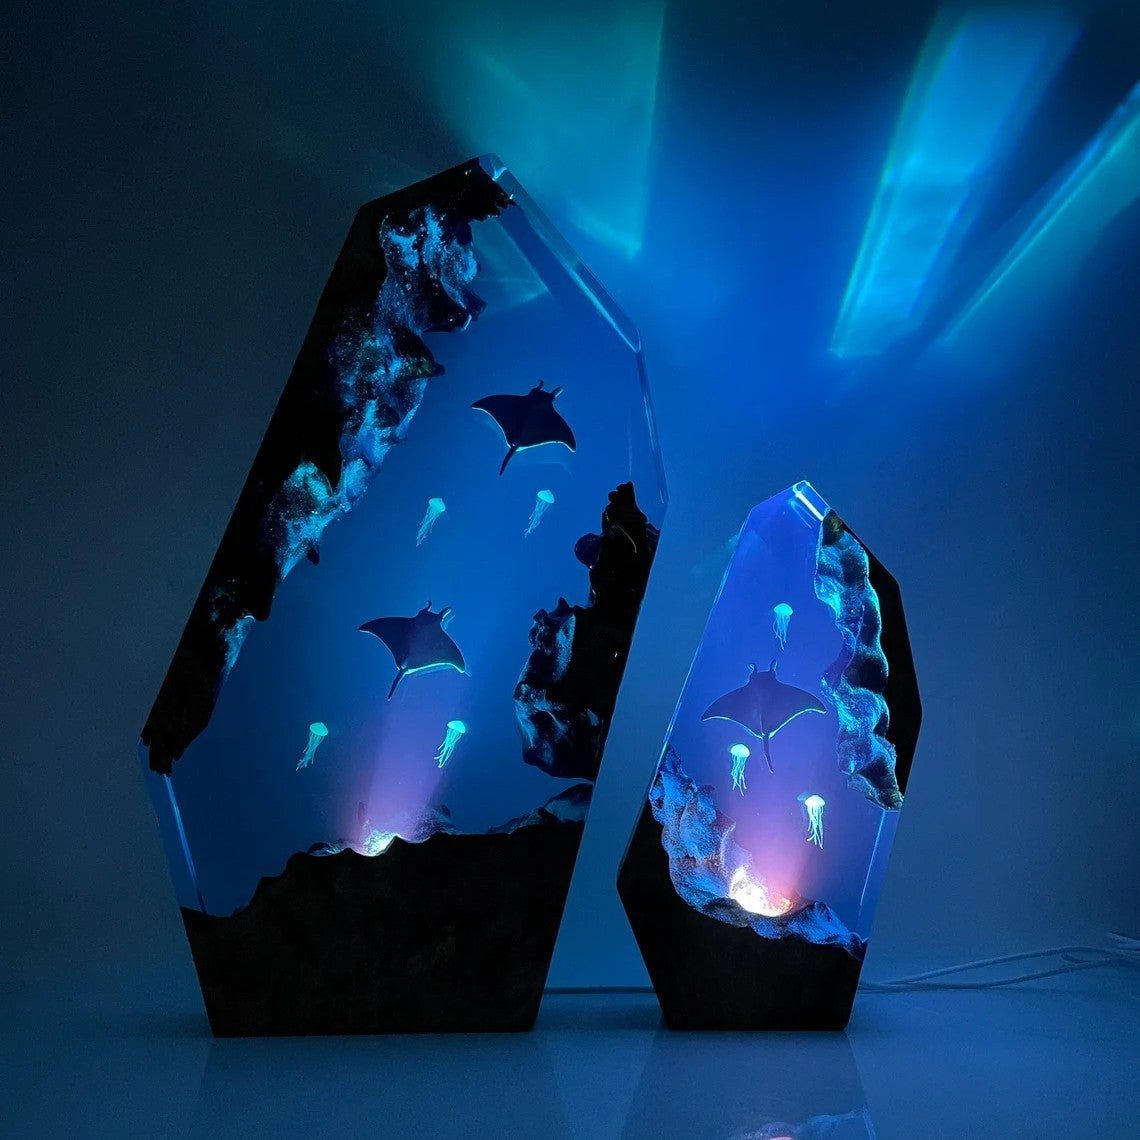 Resin Ocean Wood Lamp Manta Rays Jellyfish Nemo and Couple Diver Home Decor Christmas Gift NTD